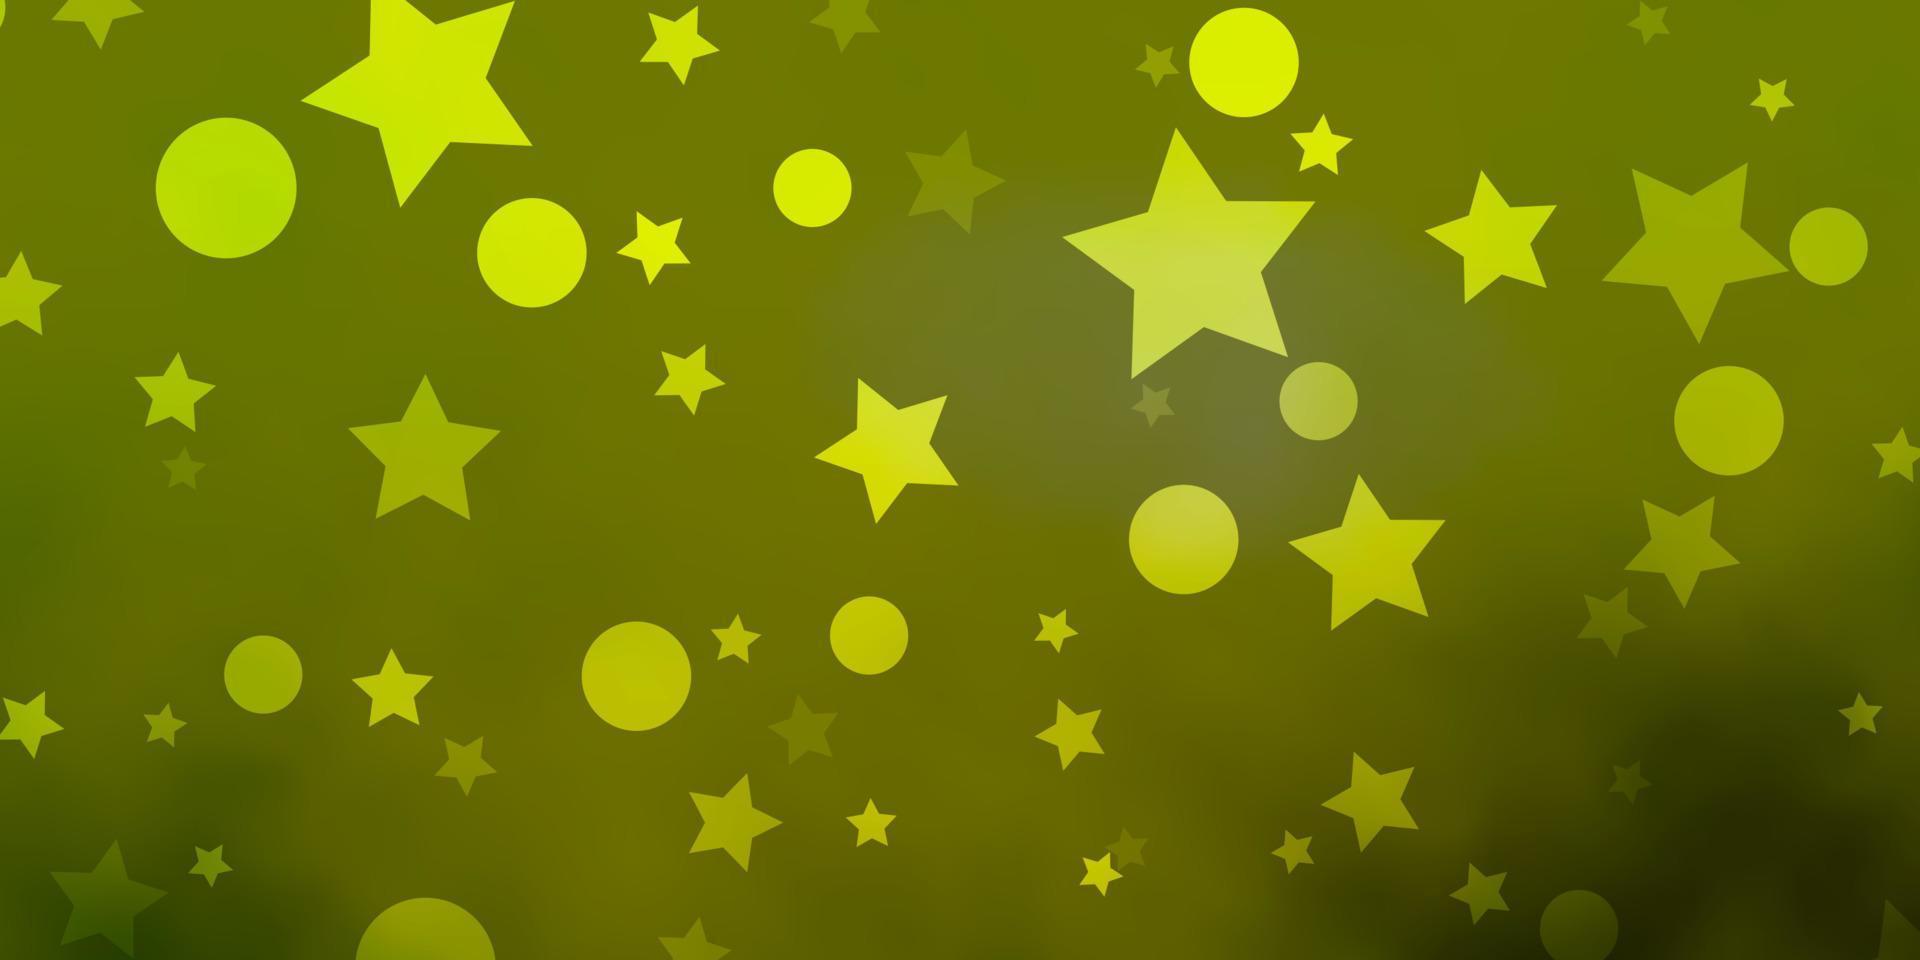 Light Green, Yellow vector background with circles, stars.